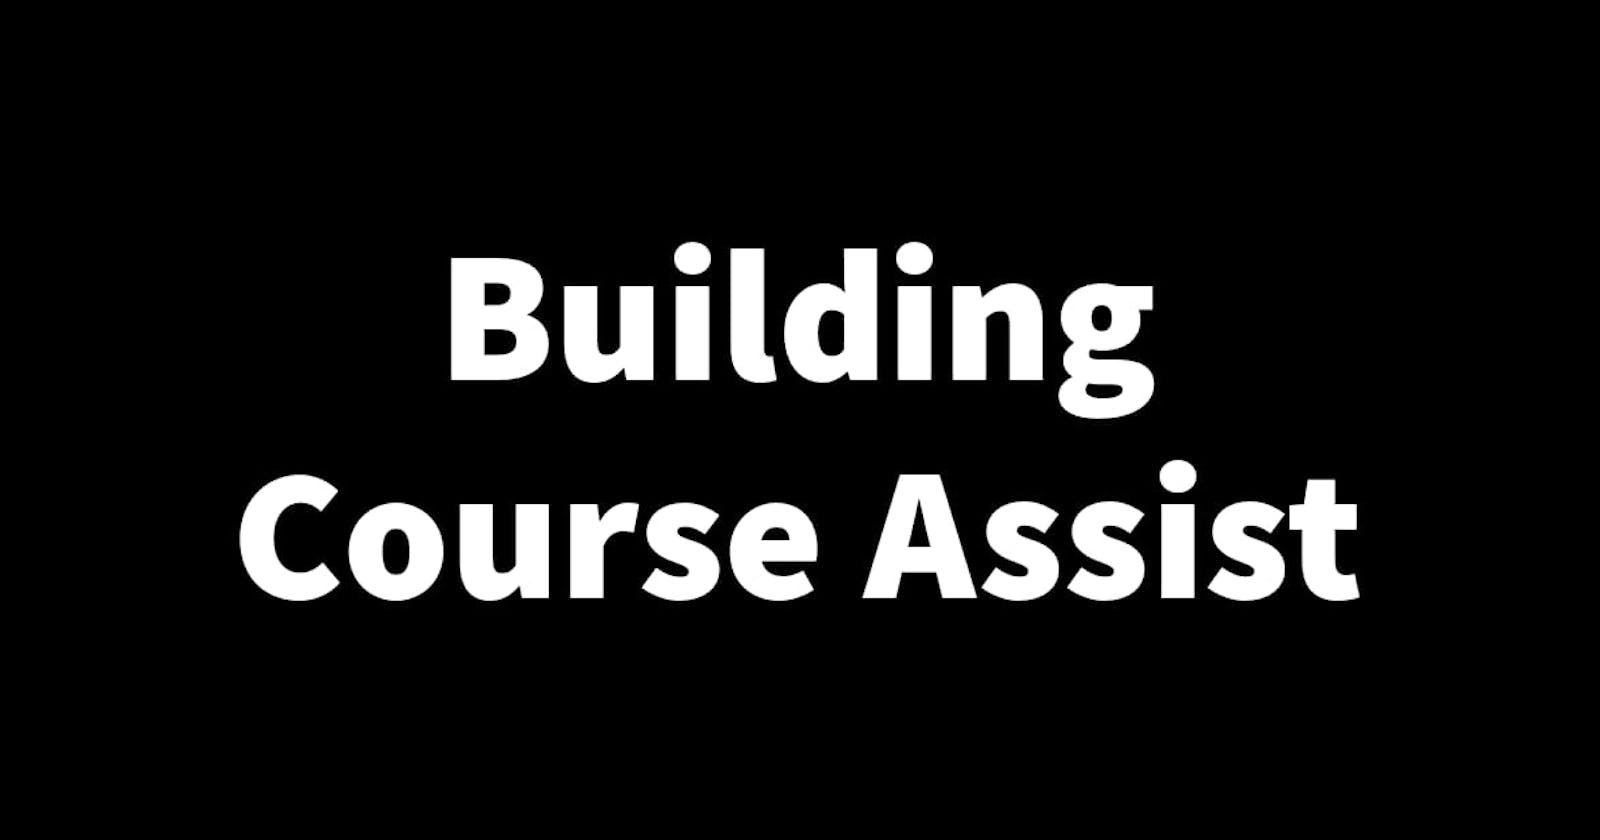 Building Course Assist Part 8: Deploying the Course Assist backend to AWS.